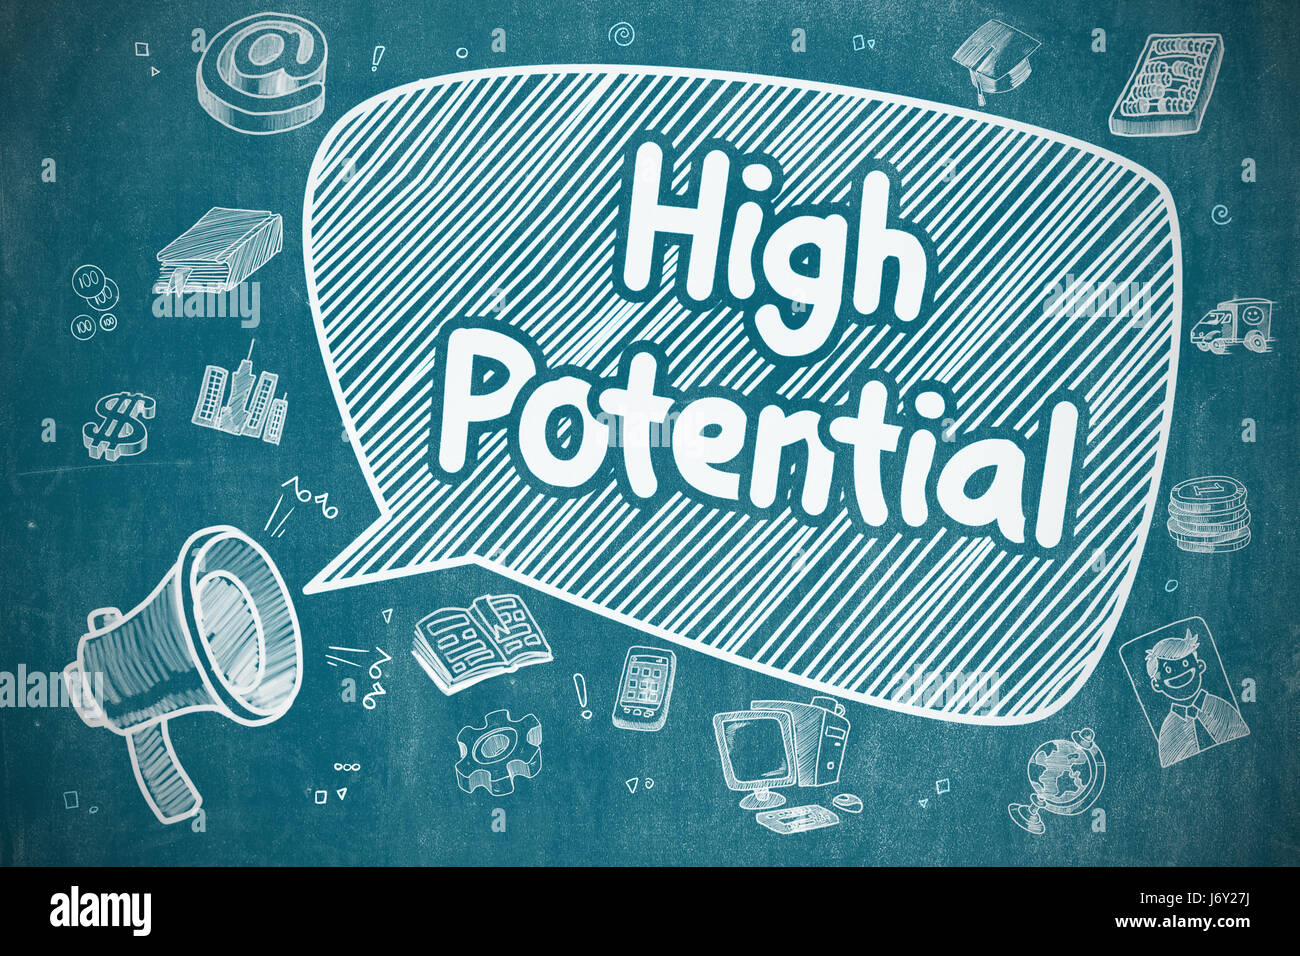 High Potential - Hand Drawn Illustration on Blue Chalkboard. Stock Photo